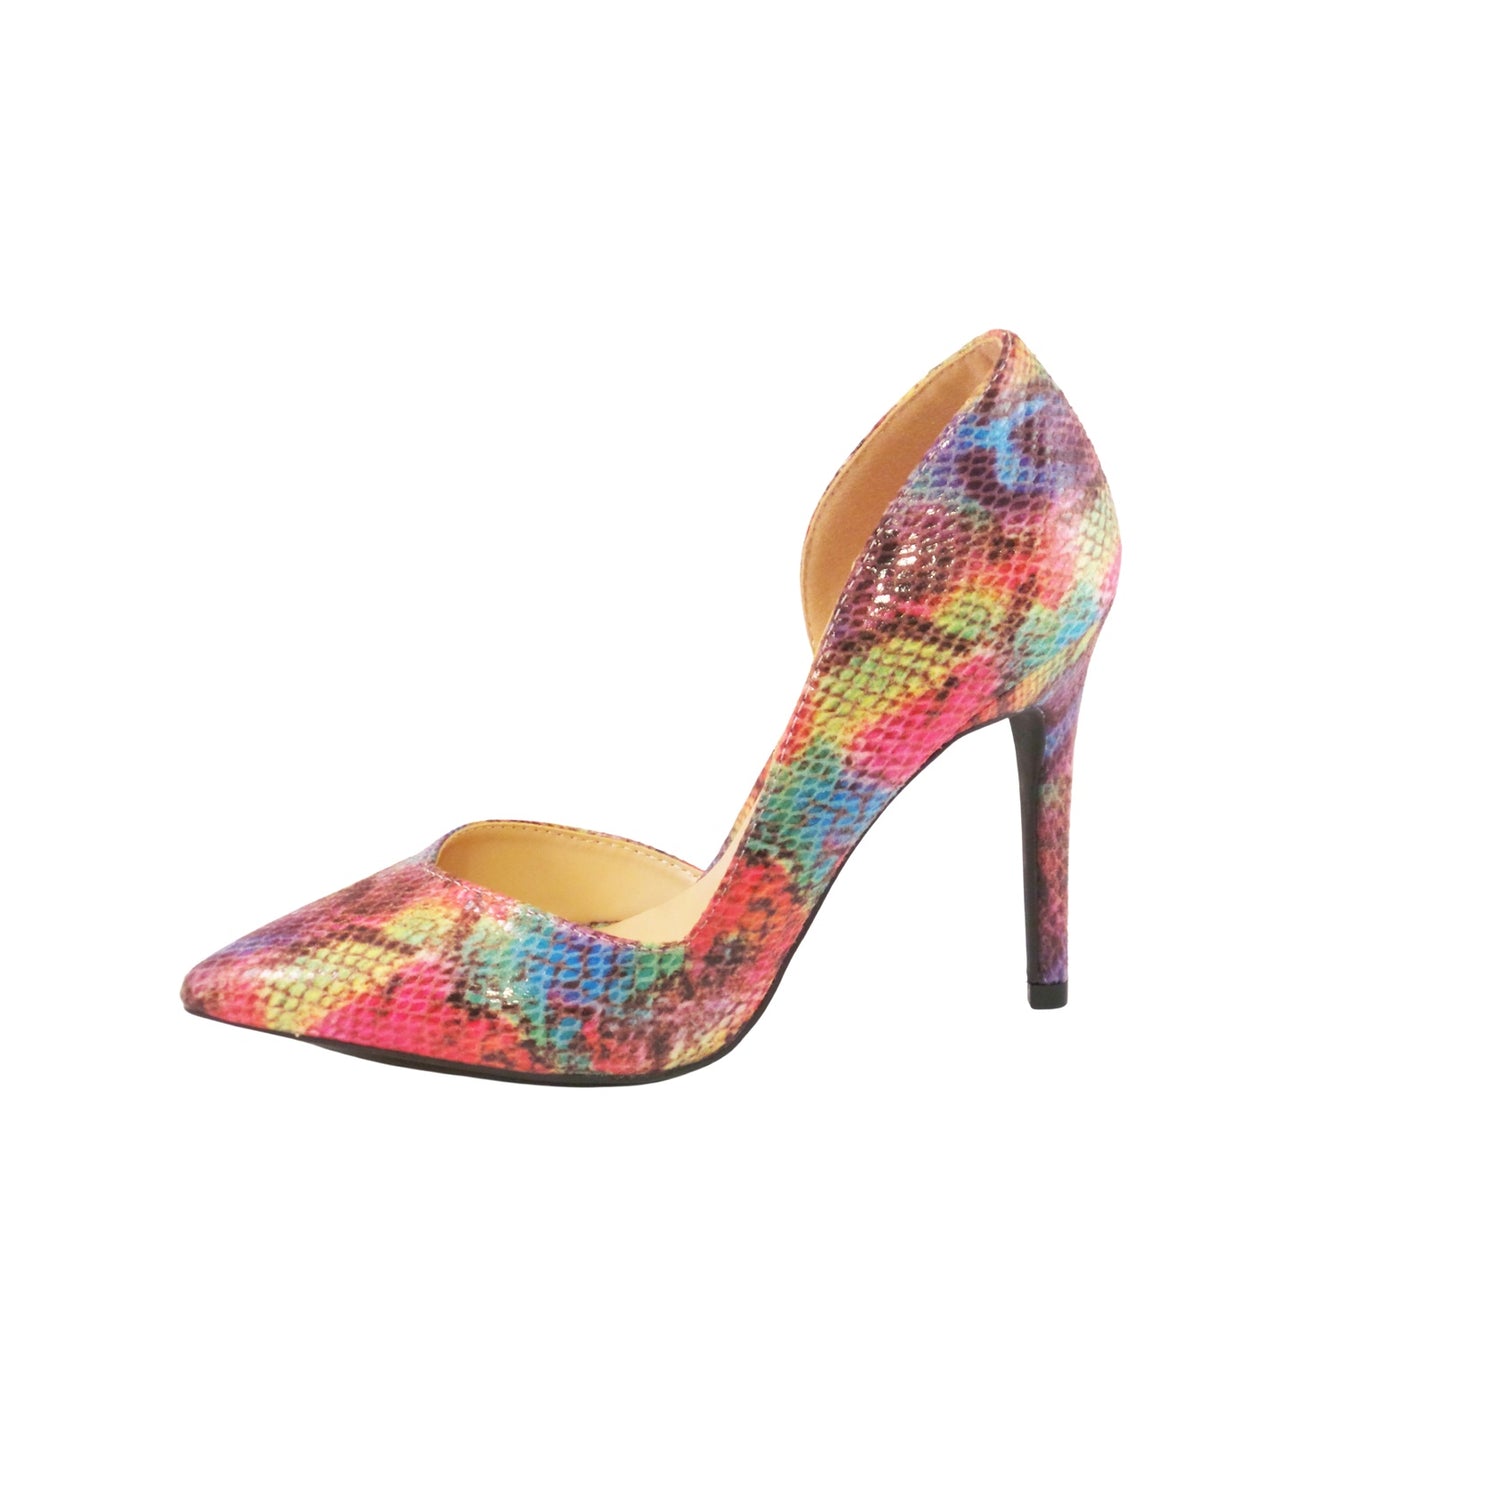 Neon Snake Print Shoes Cheapest Sellers